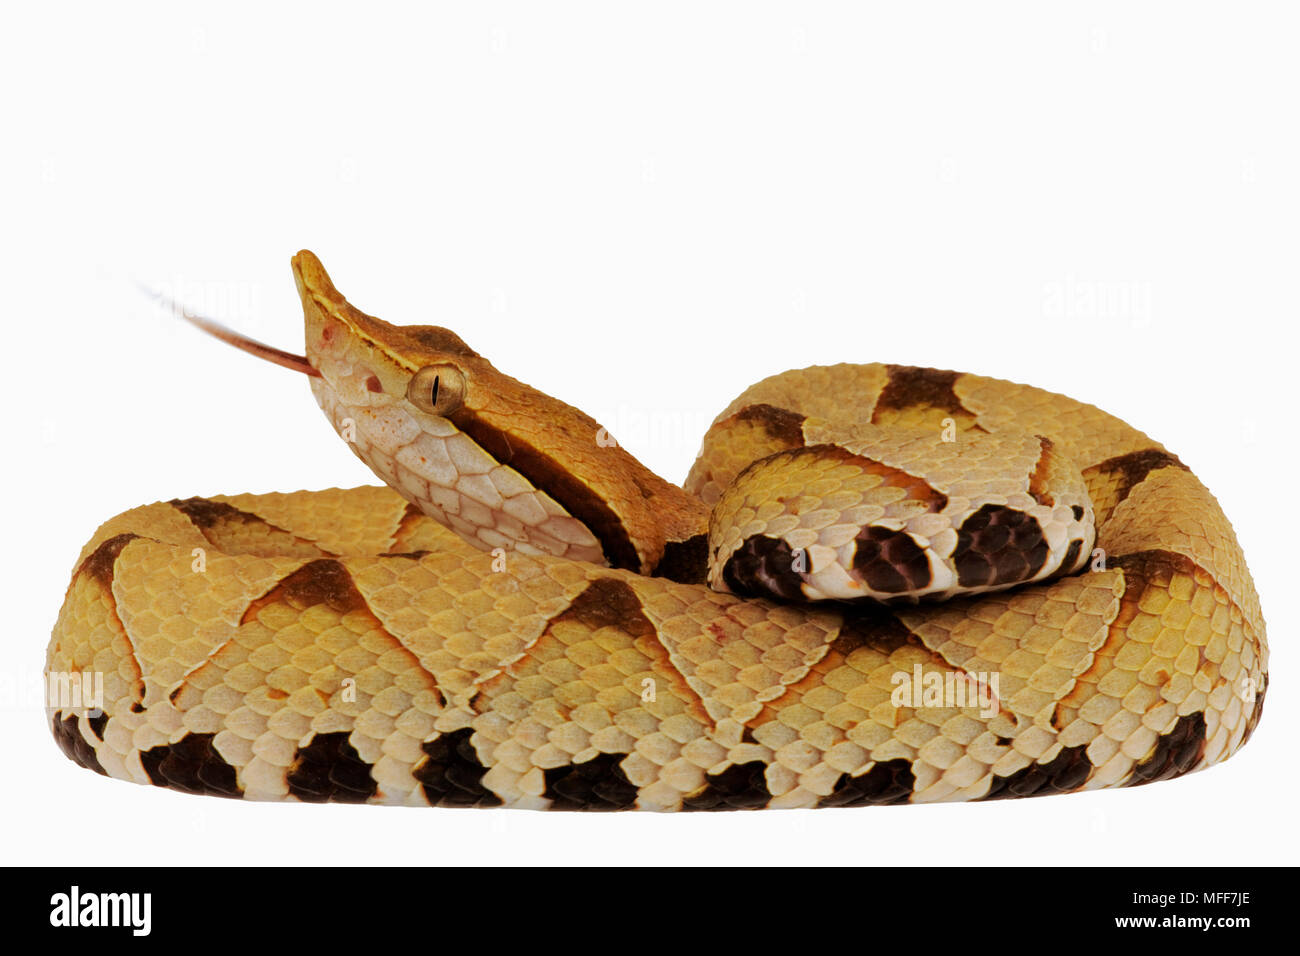 HUNDRED-PACE or SHARP-NOSED VIPER Deinagkistrodon acutus coiled against a white background.  From China and Vietnam. Stock Photo